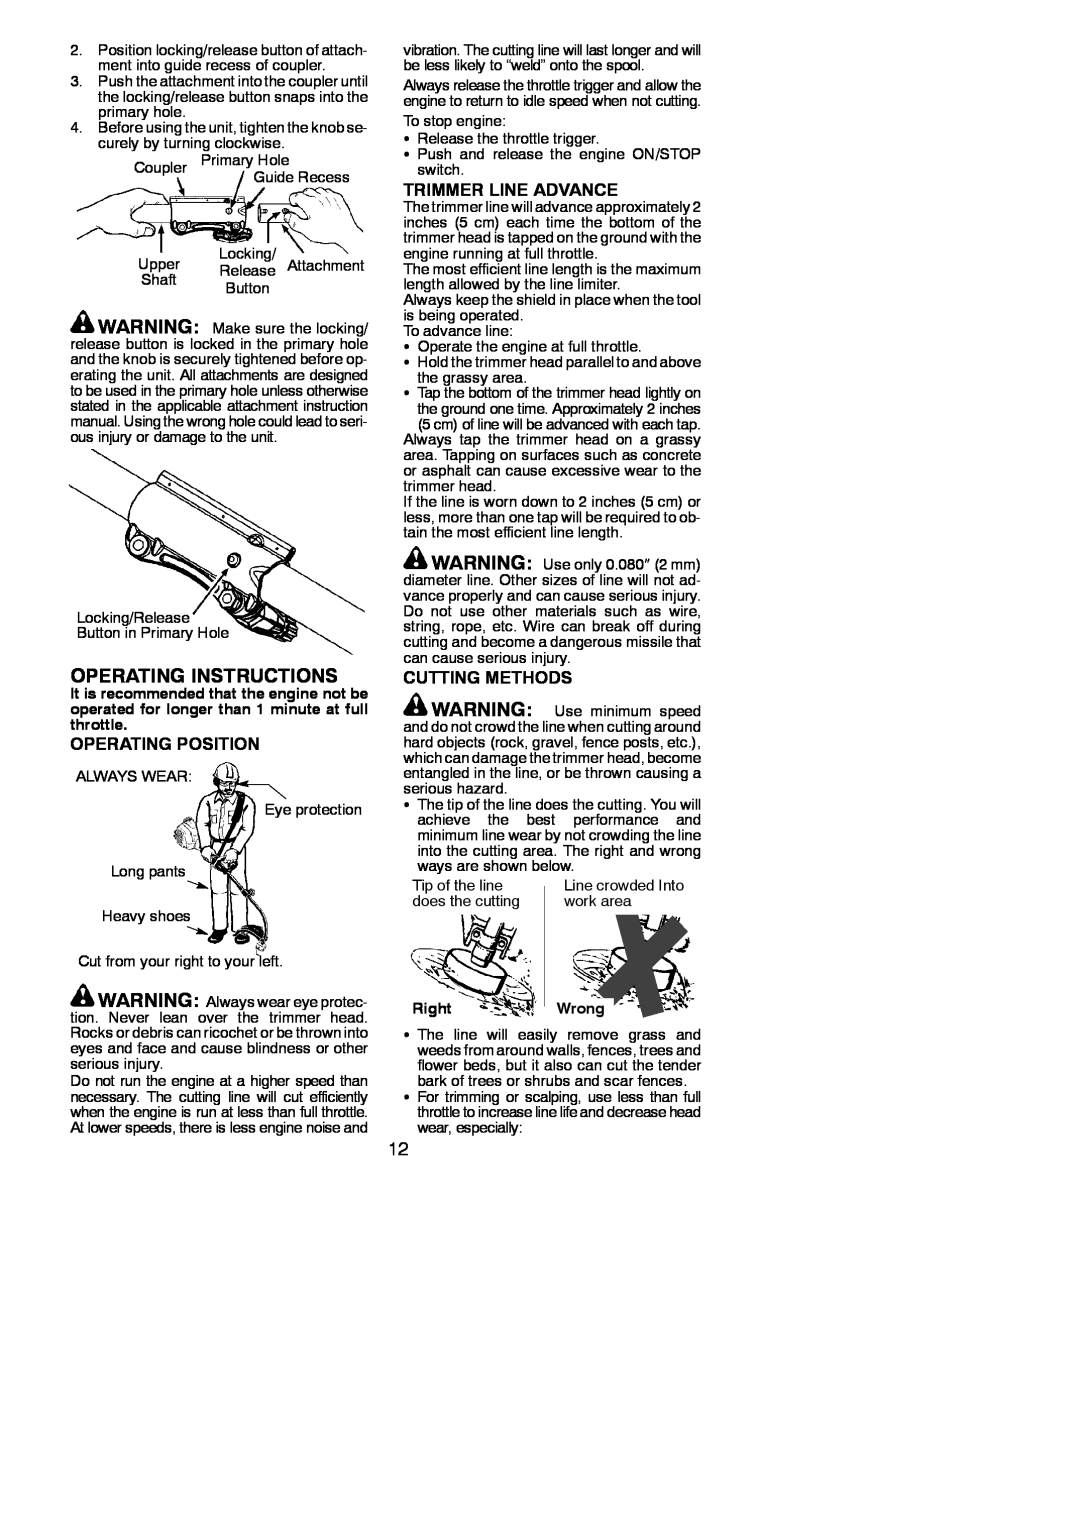 Poulan 115249426 Operating Instructions, Operating Position, Trimmer Line Advance, Cutting Methods, RightWrong 